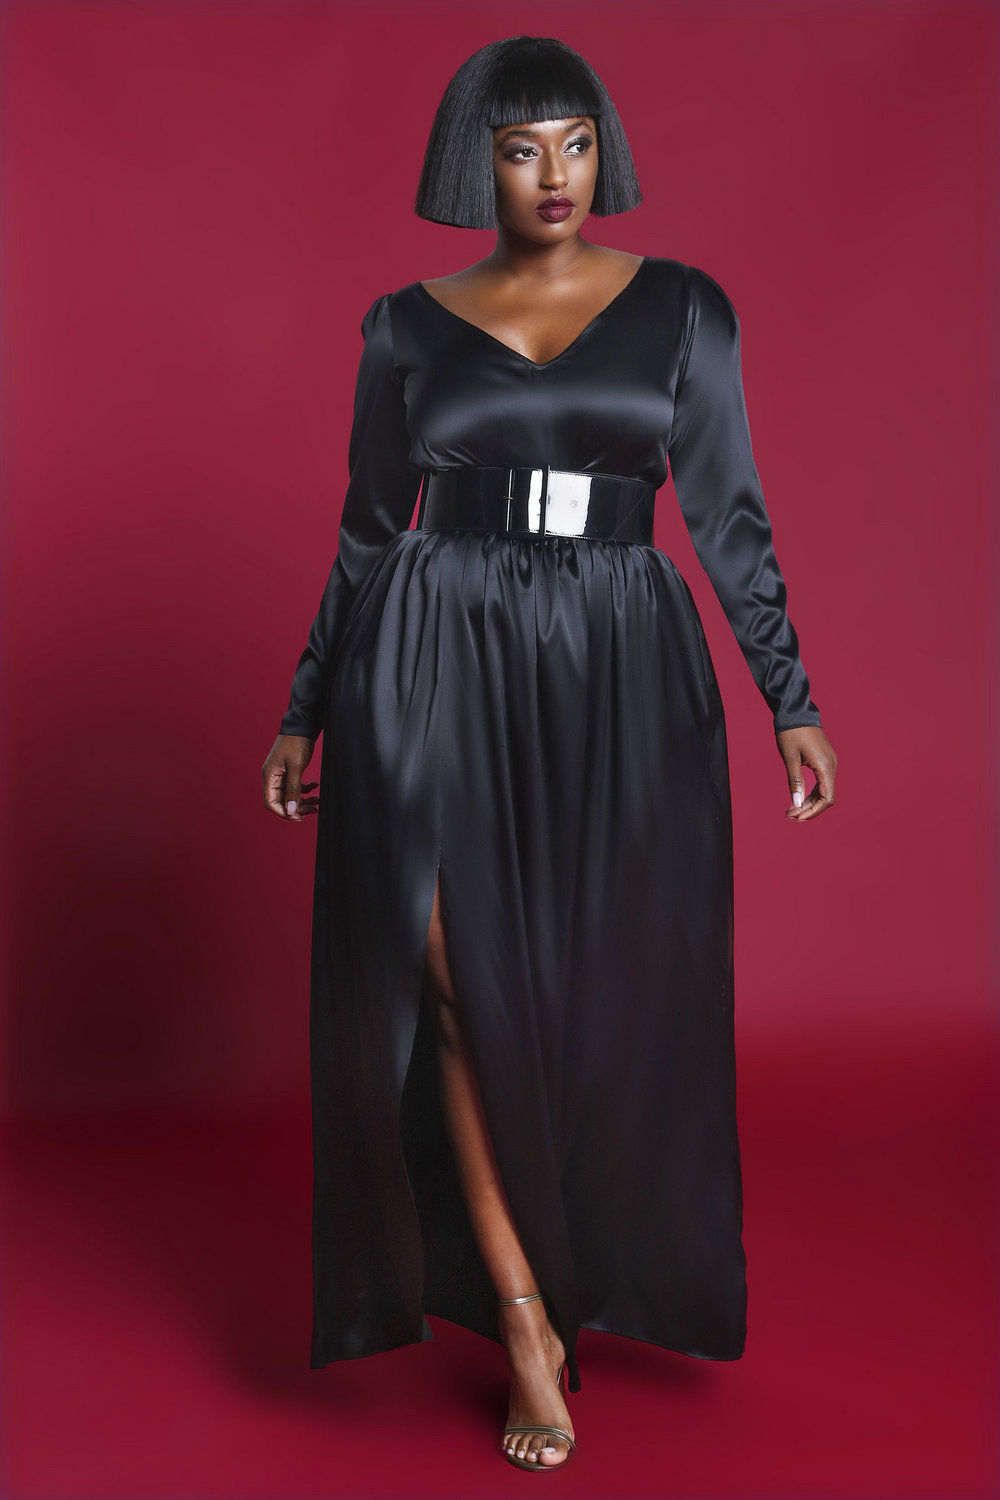 Plus Size Holiday Style- The 2018 Jibri Holiday Collection